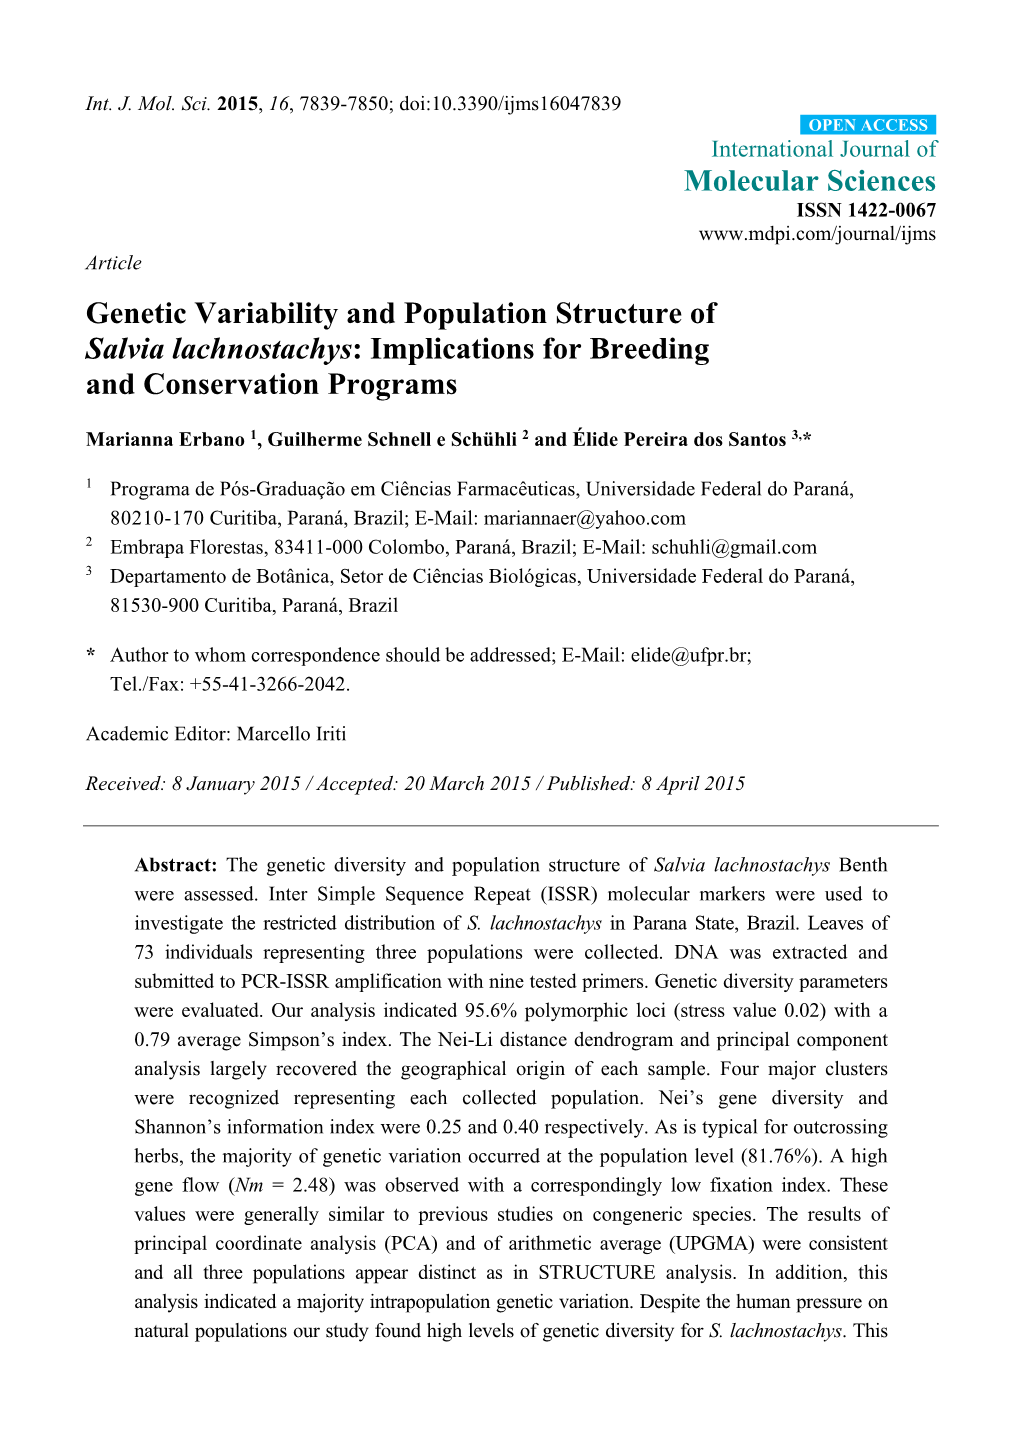 Genetic Variability and Population Structure of Salvia Lachnostachys: Implications for Breeding and Conservation Programs